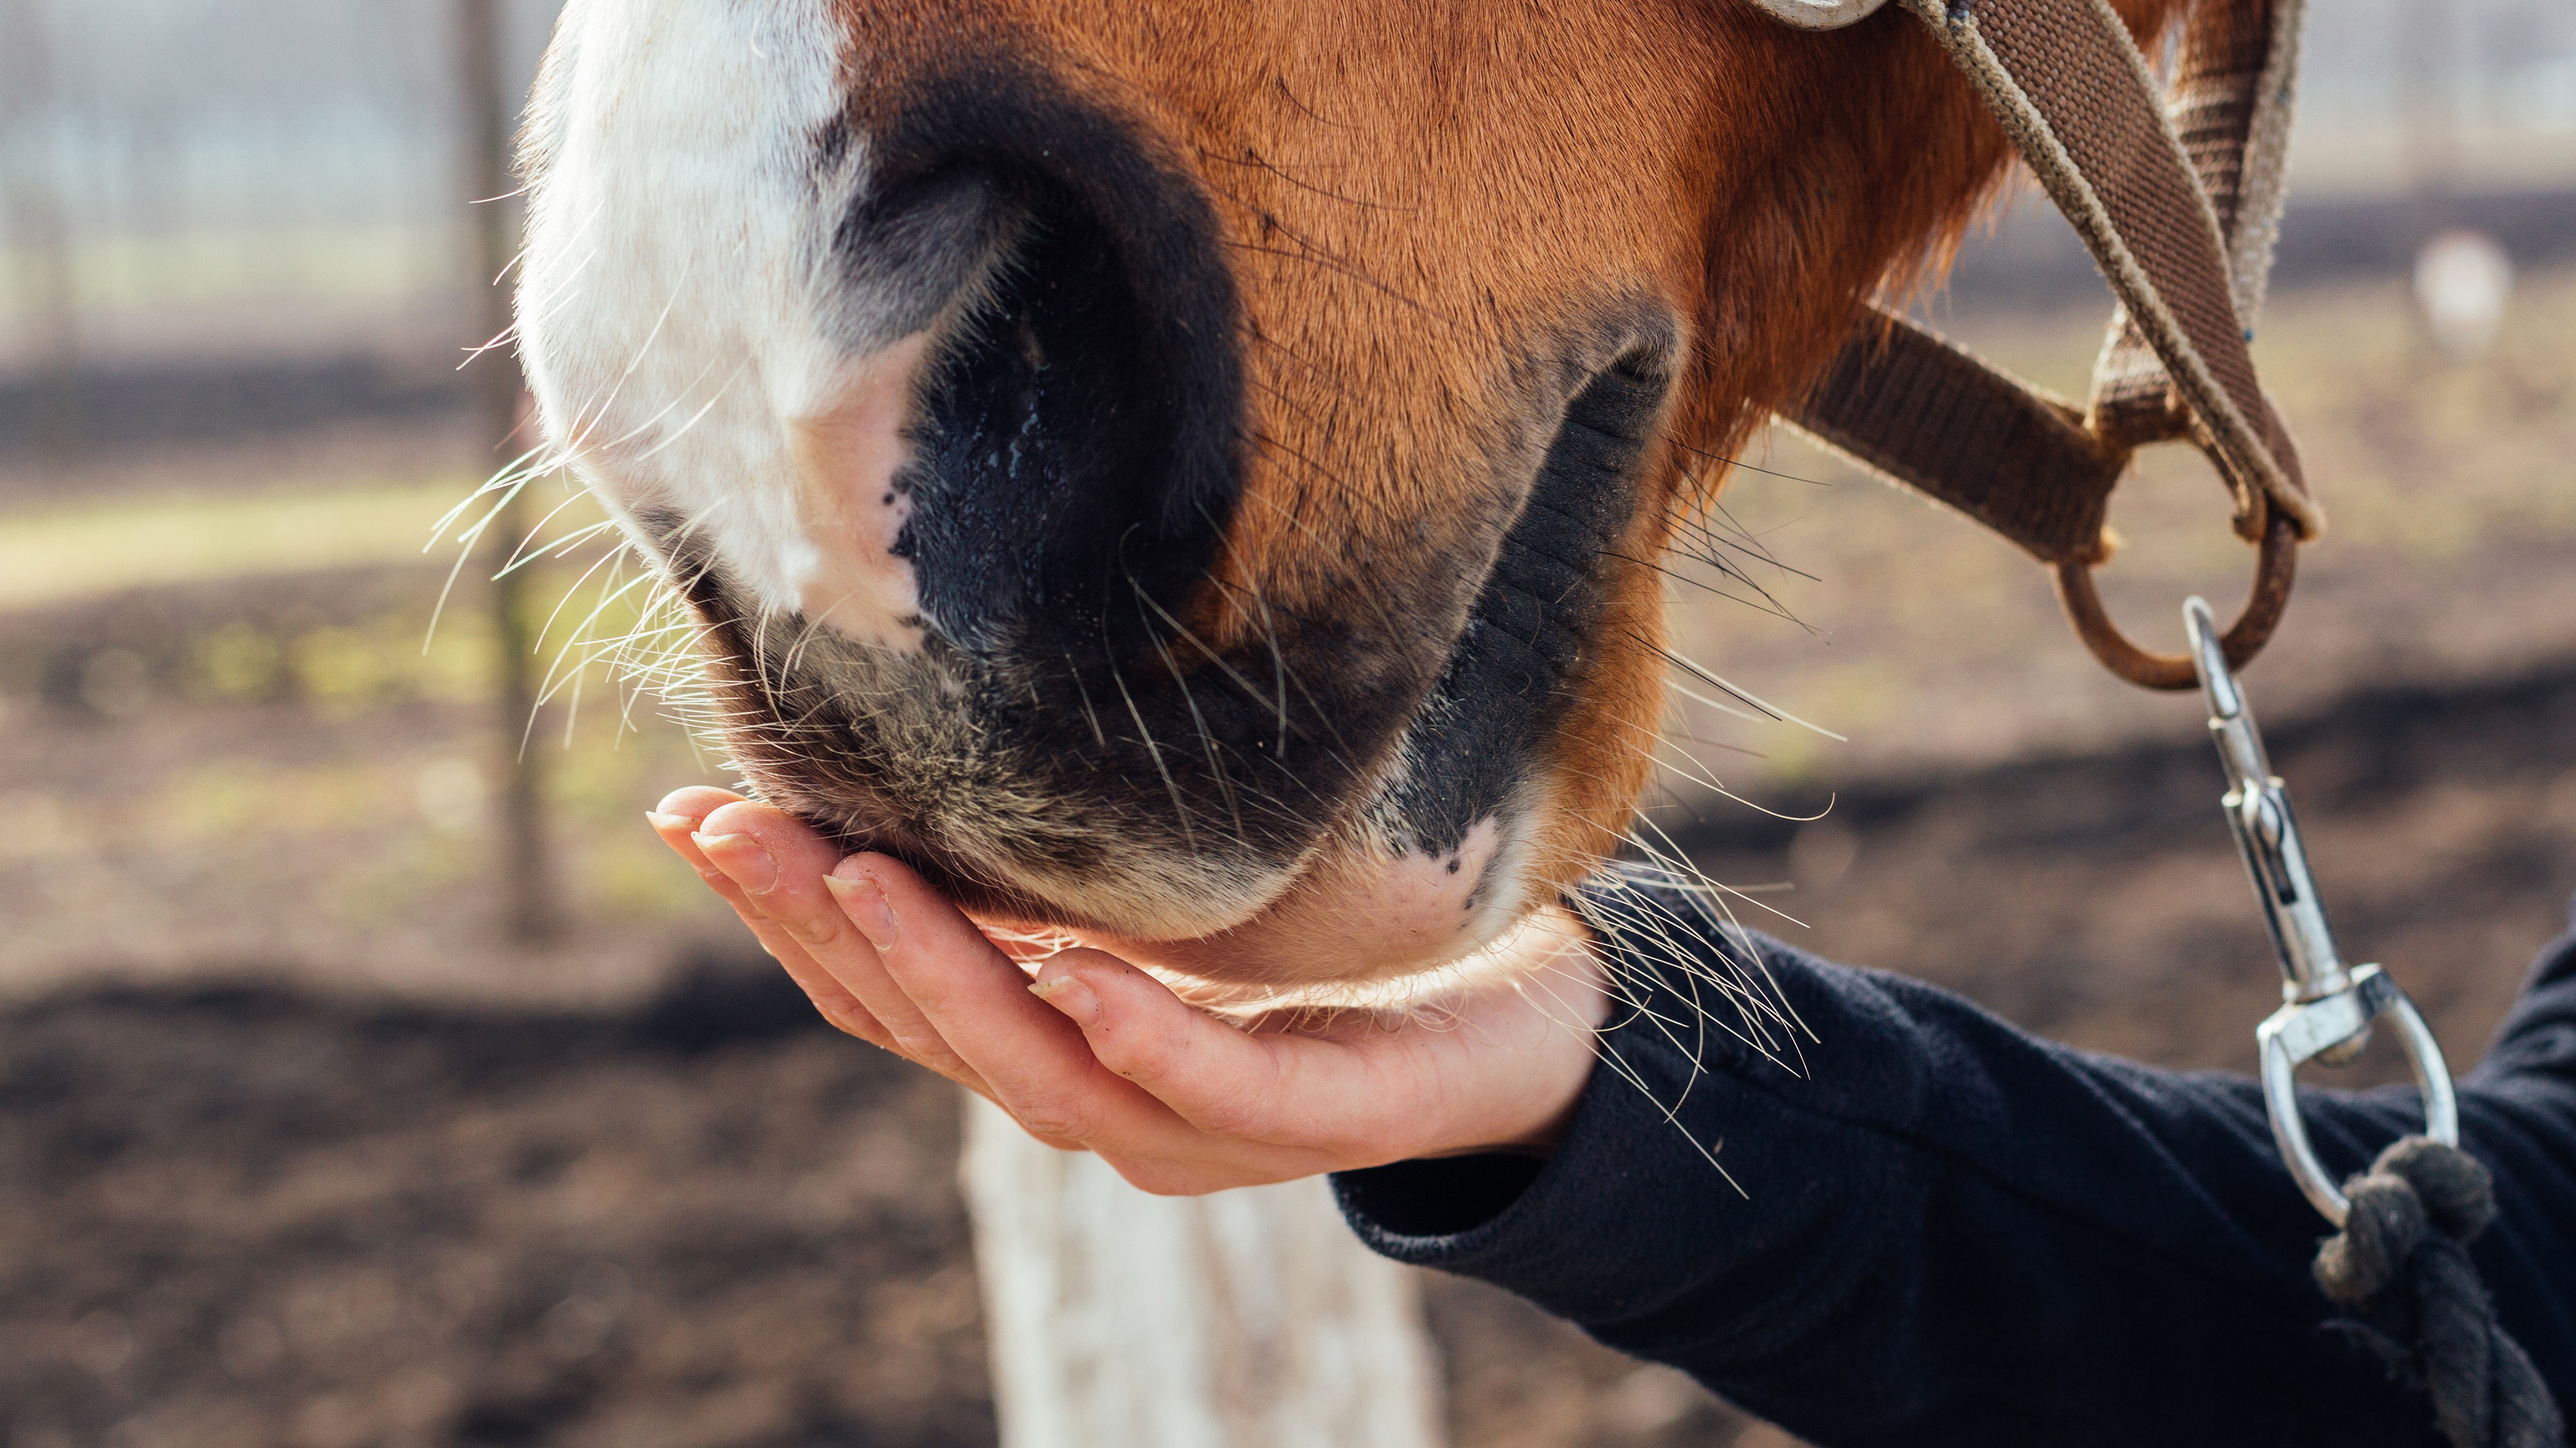 Do you Know How Much Garlic To Feed Horses?